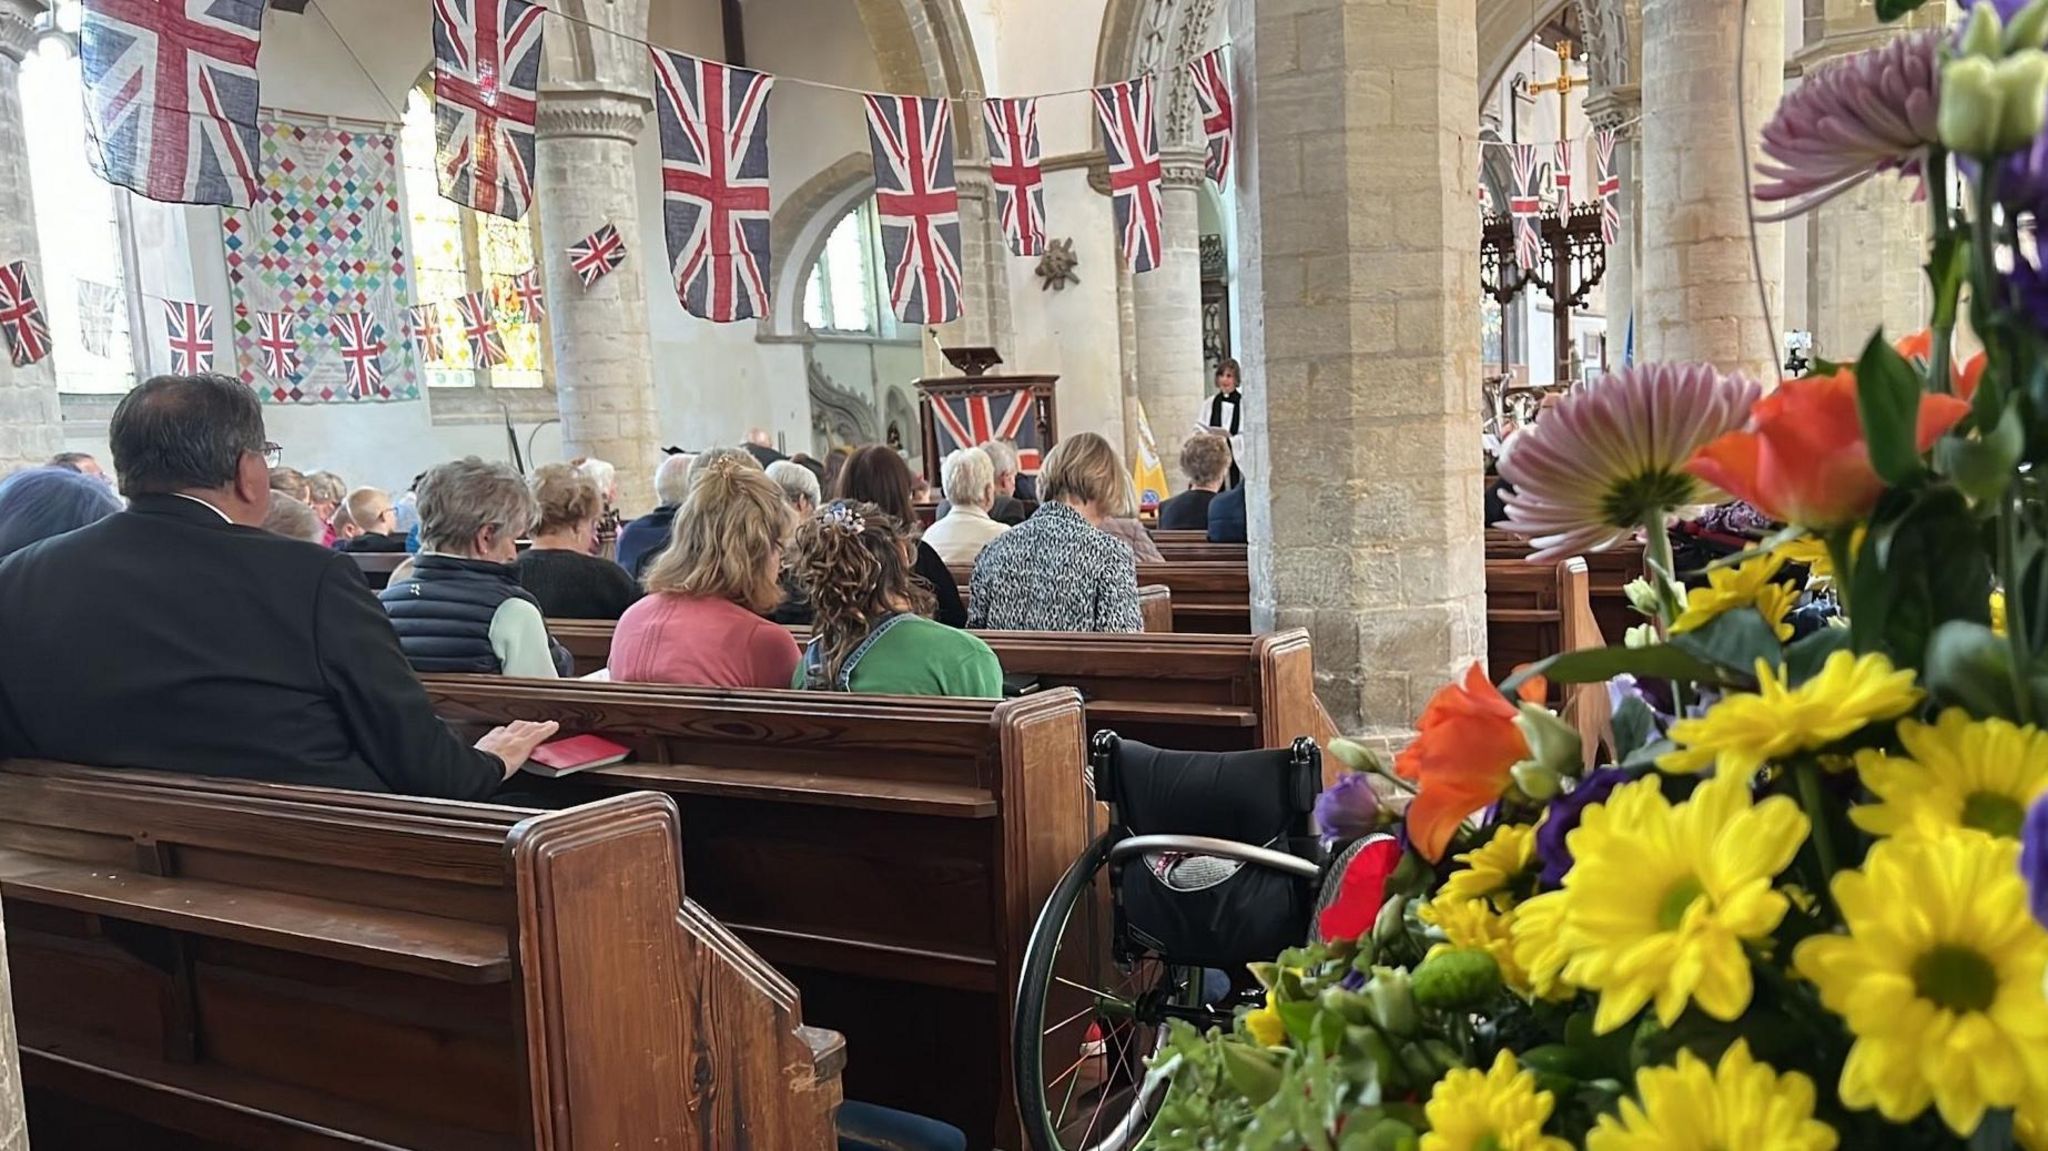 Interior of St Andrew's, Soham, showing people sitting in pews and Union Flags hanging in lines above